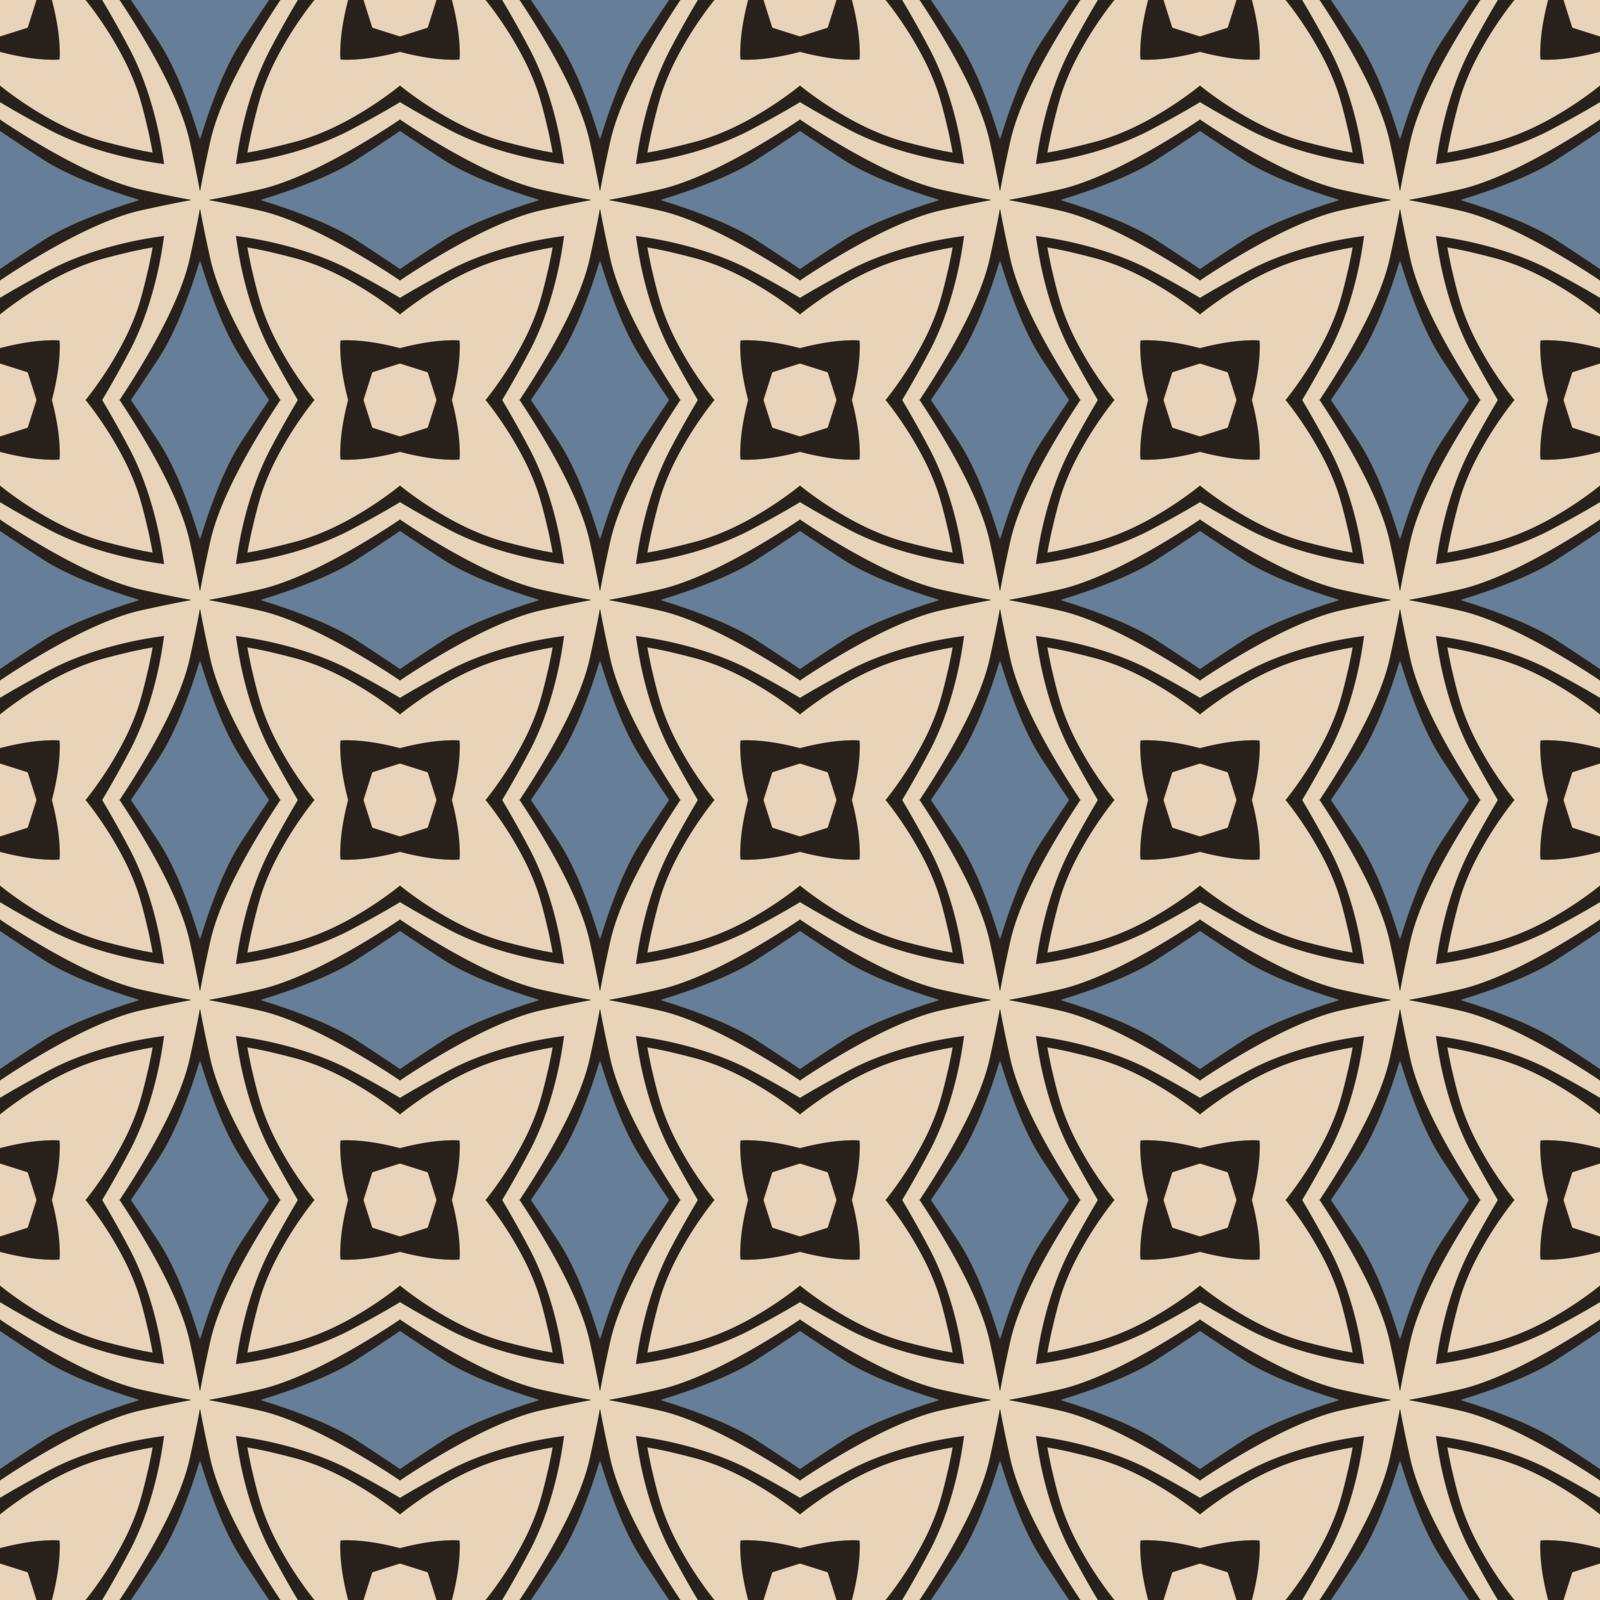 Seamless illustrated pattern made of abstract elements in beige, blue and black